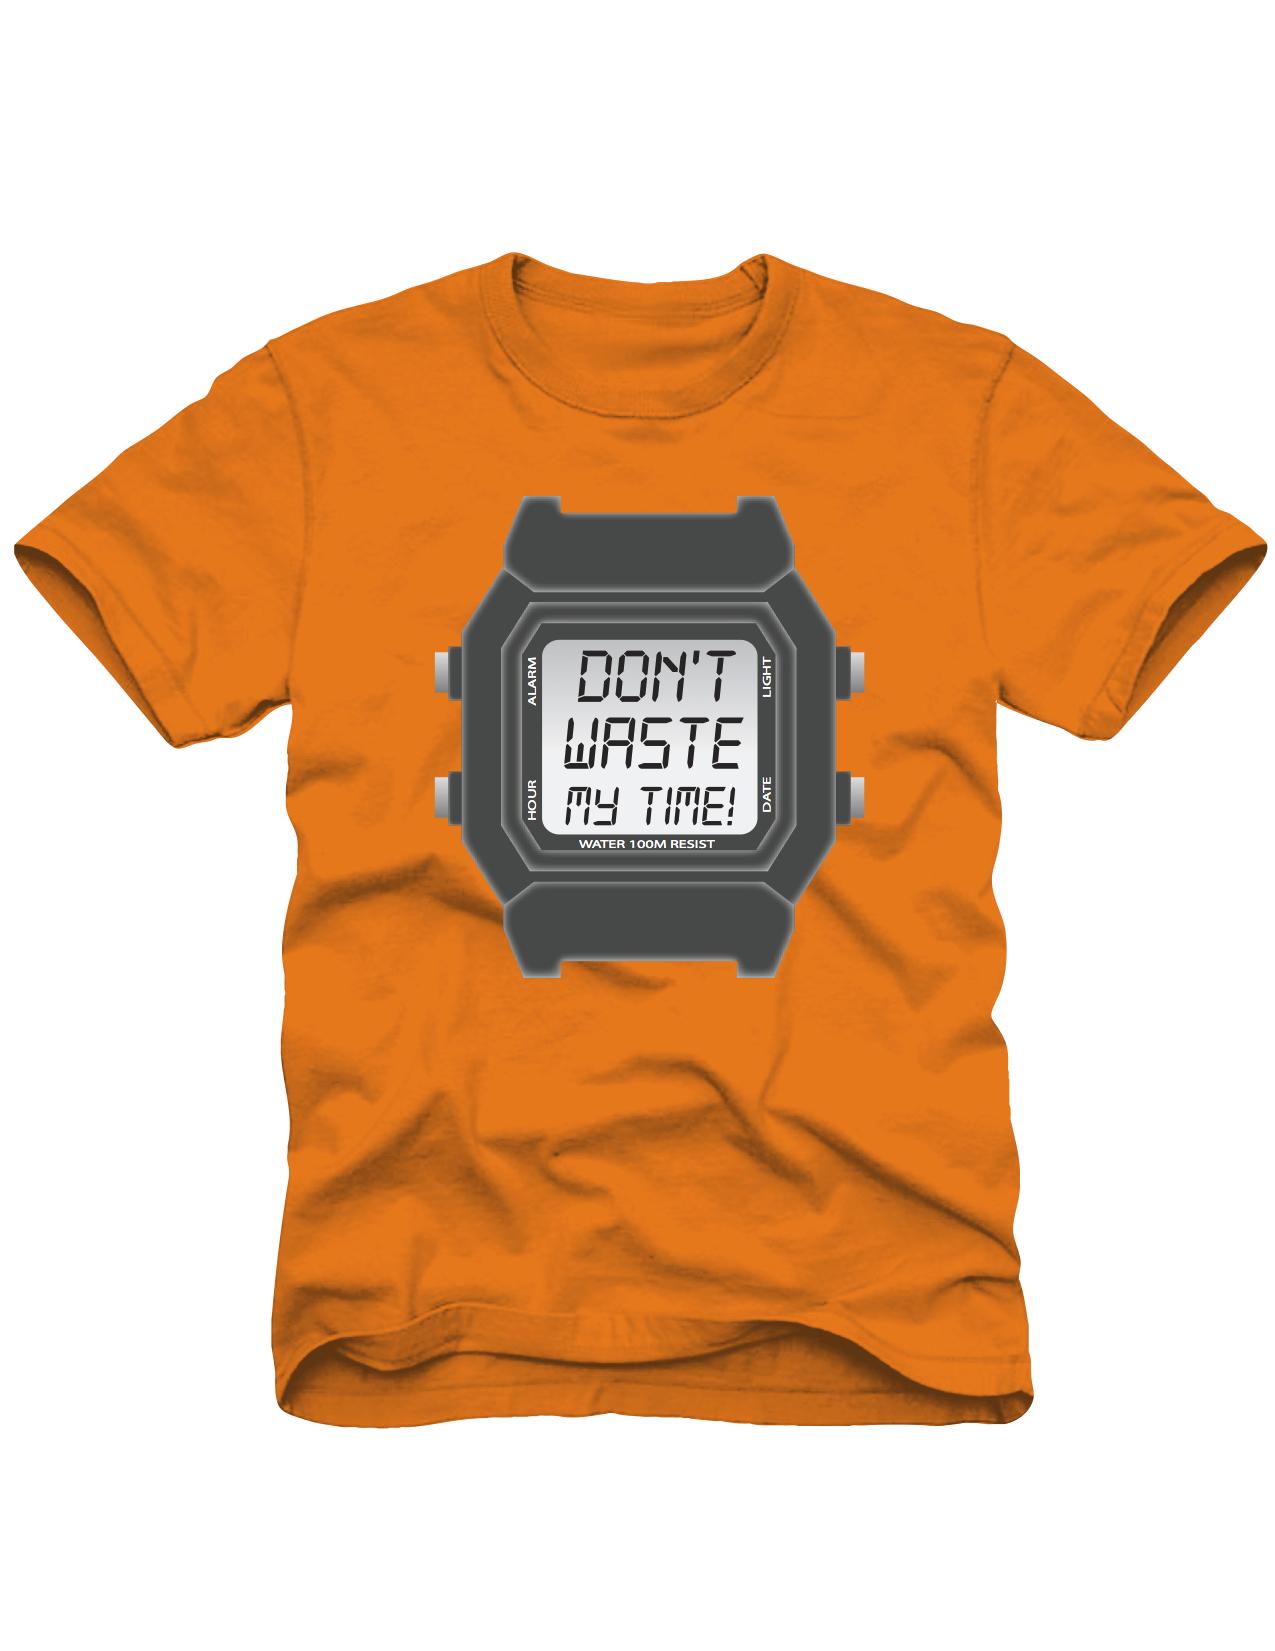 Route 66 Boy's Graphic T-Shirt - Don't Waste My Time